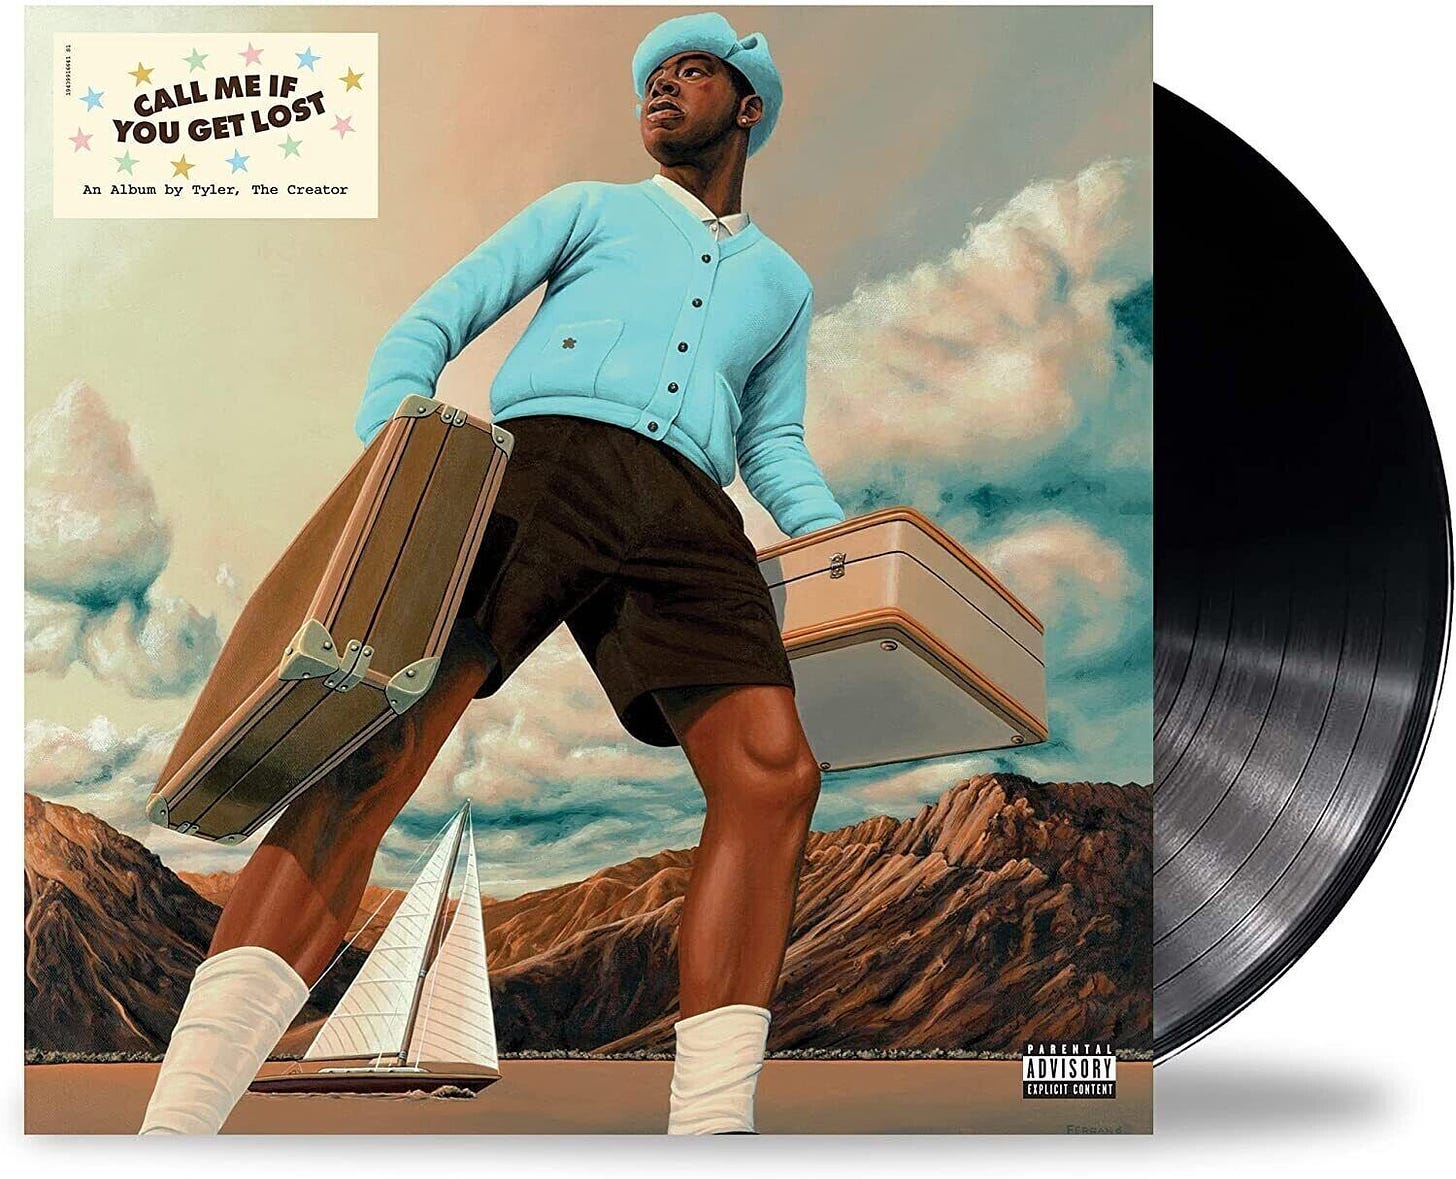 Call Me If You Get Lost by Tyler the Creator (Record, 2022) for sale online  | eBay